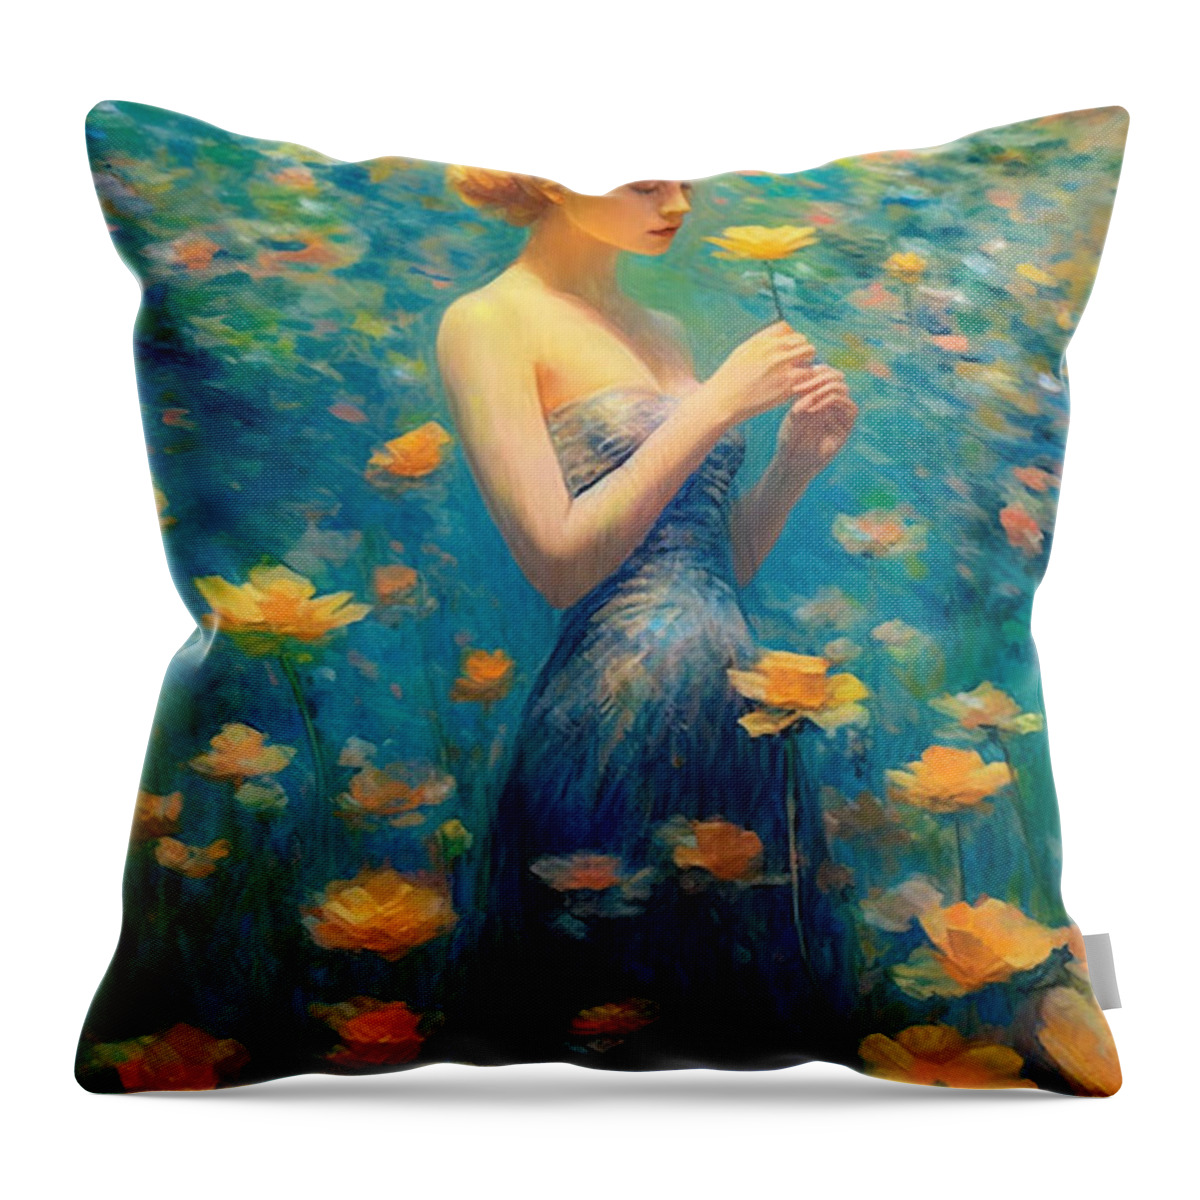 Flowers Throw Pillow featuring the digital art Spring Flowers by Jackson Parrish